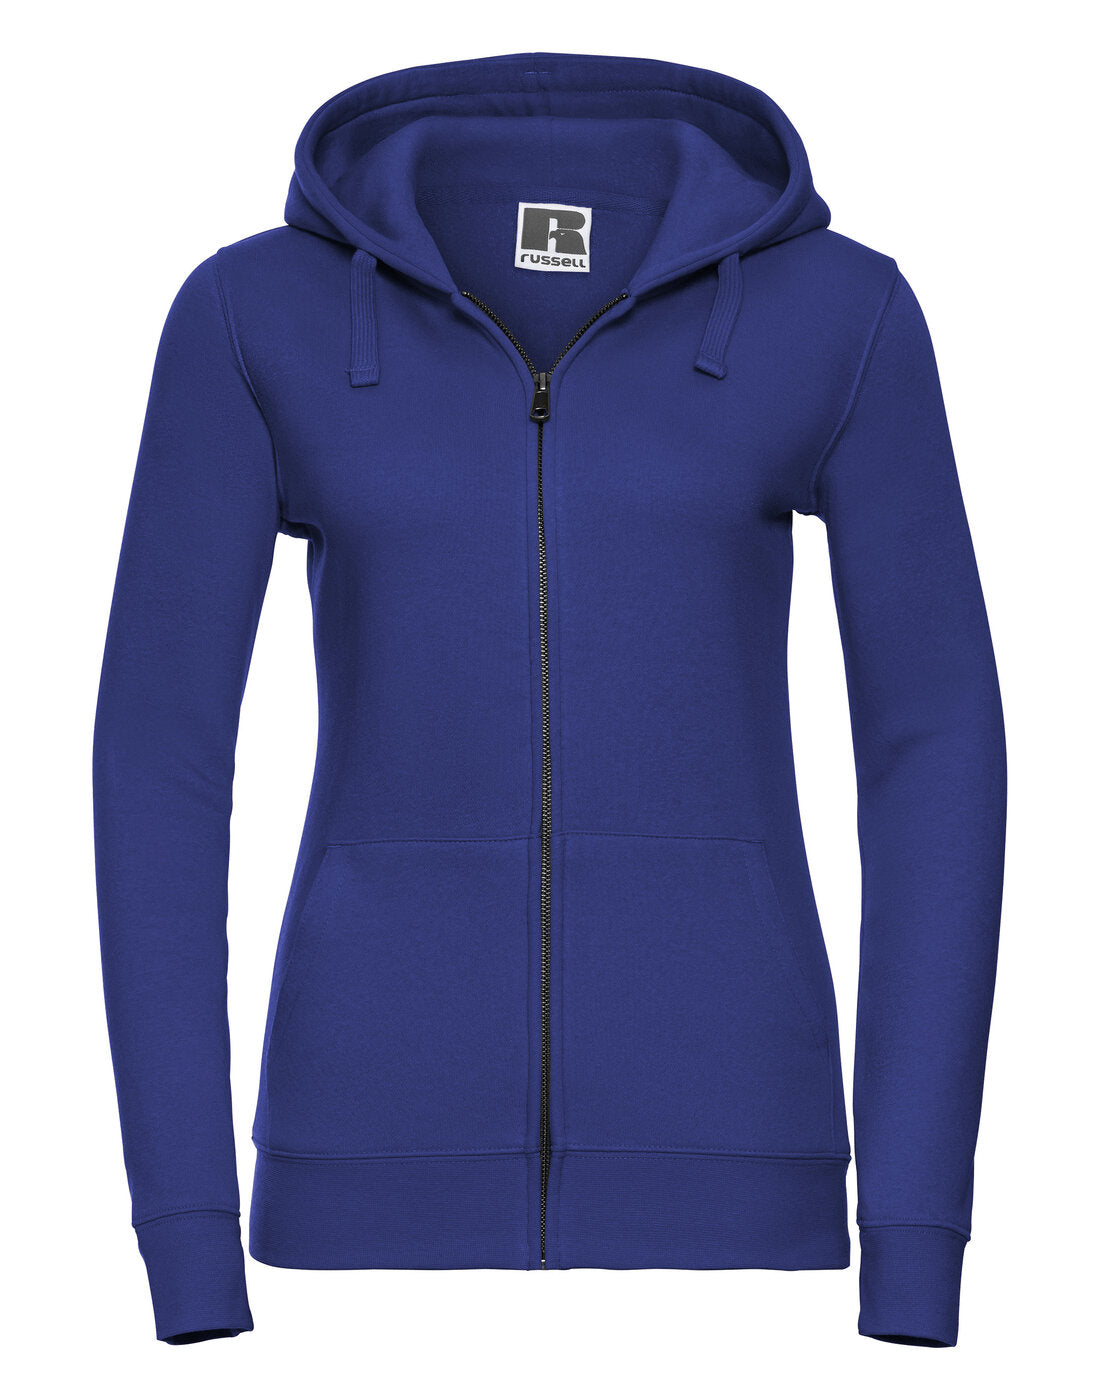 Russell Ladies Authentic Zipped Hood Bright Royal